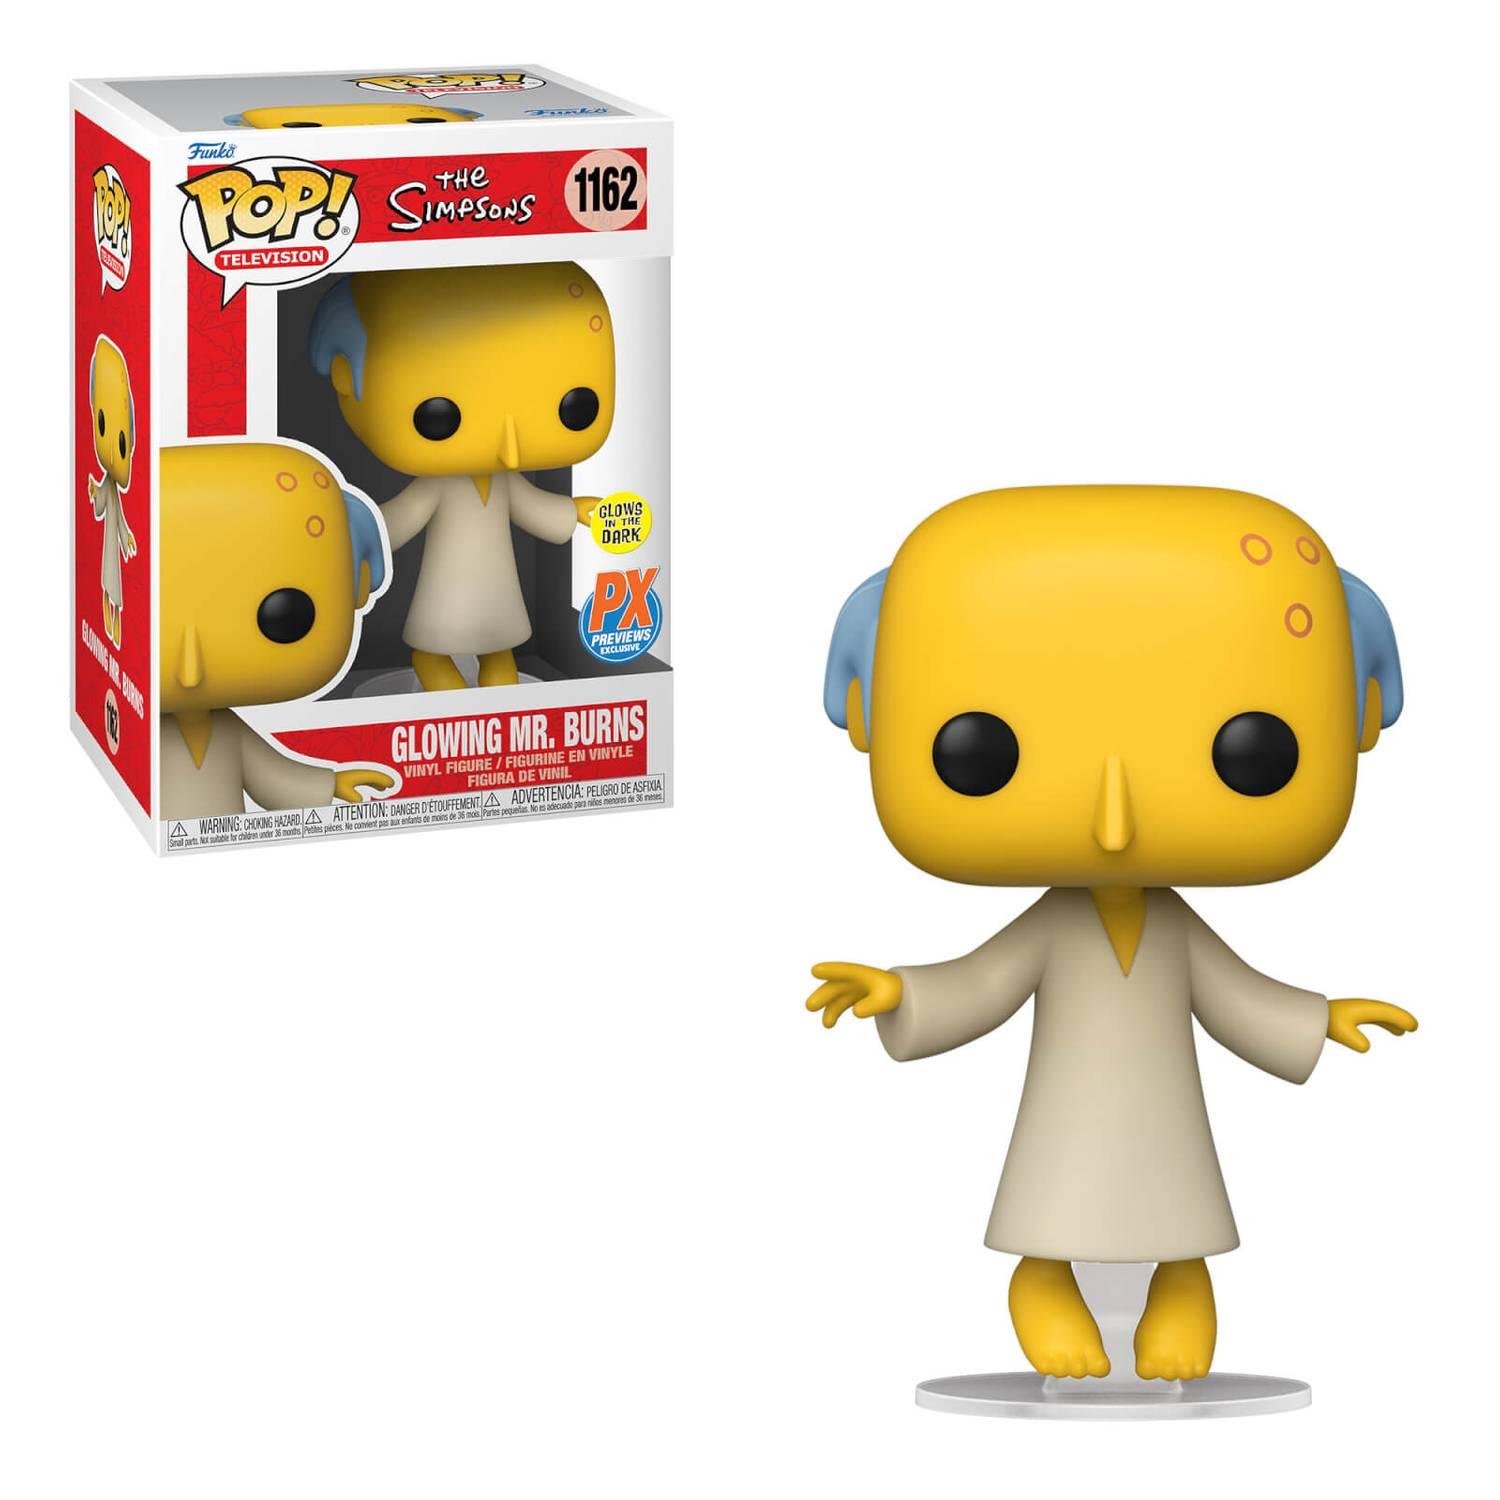 Pop! Television - The Simpsons - #1162 Glowing Mr. Burns - Glow In The Dark & PX Previews EXCLUSIVE - Hobby Champion Inc